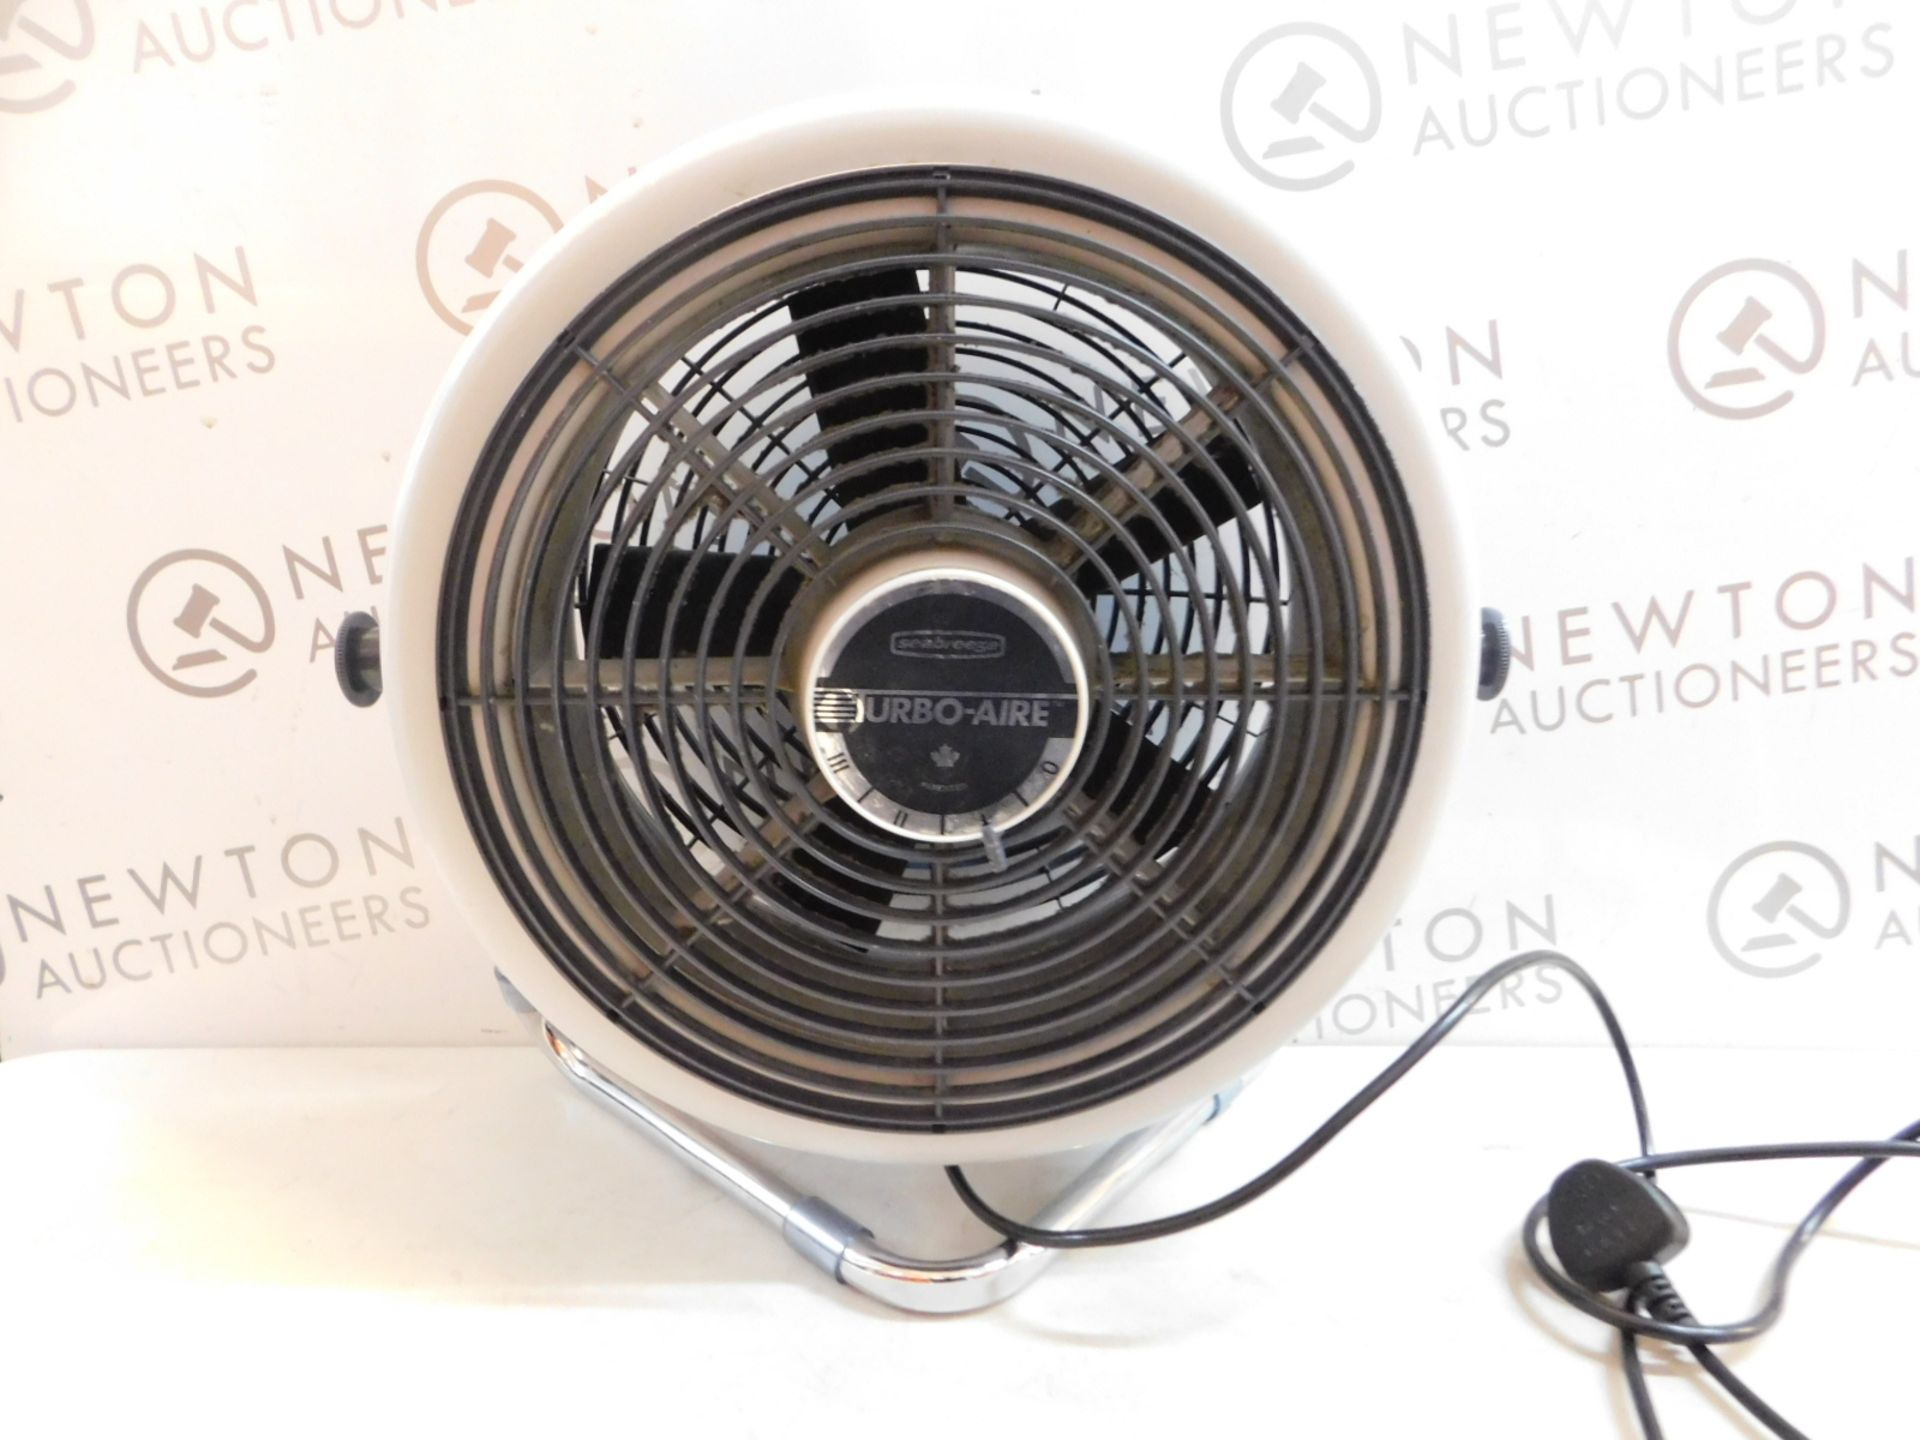 1 SEABREEZE TURBO-AIRE 3200-0 AERODYNAMIC HIGH VELOCITY 12" COOLING FAN RRP Â£119.99